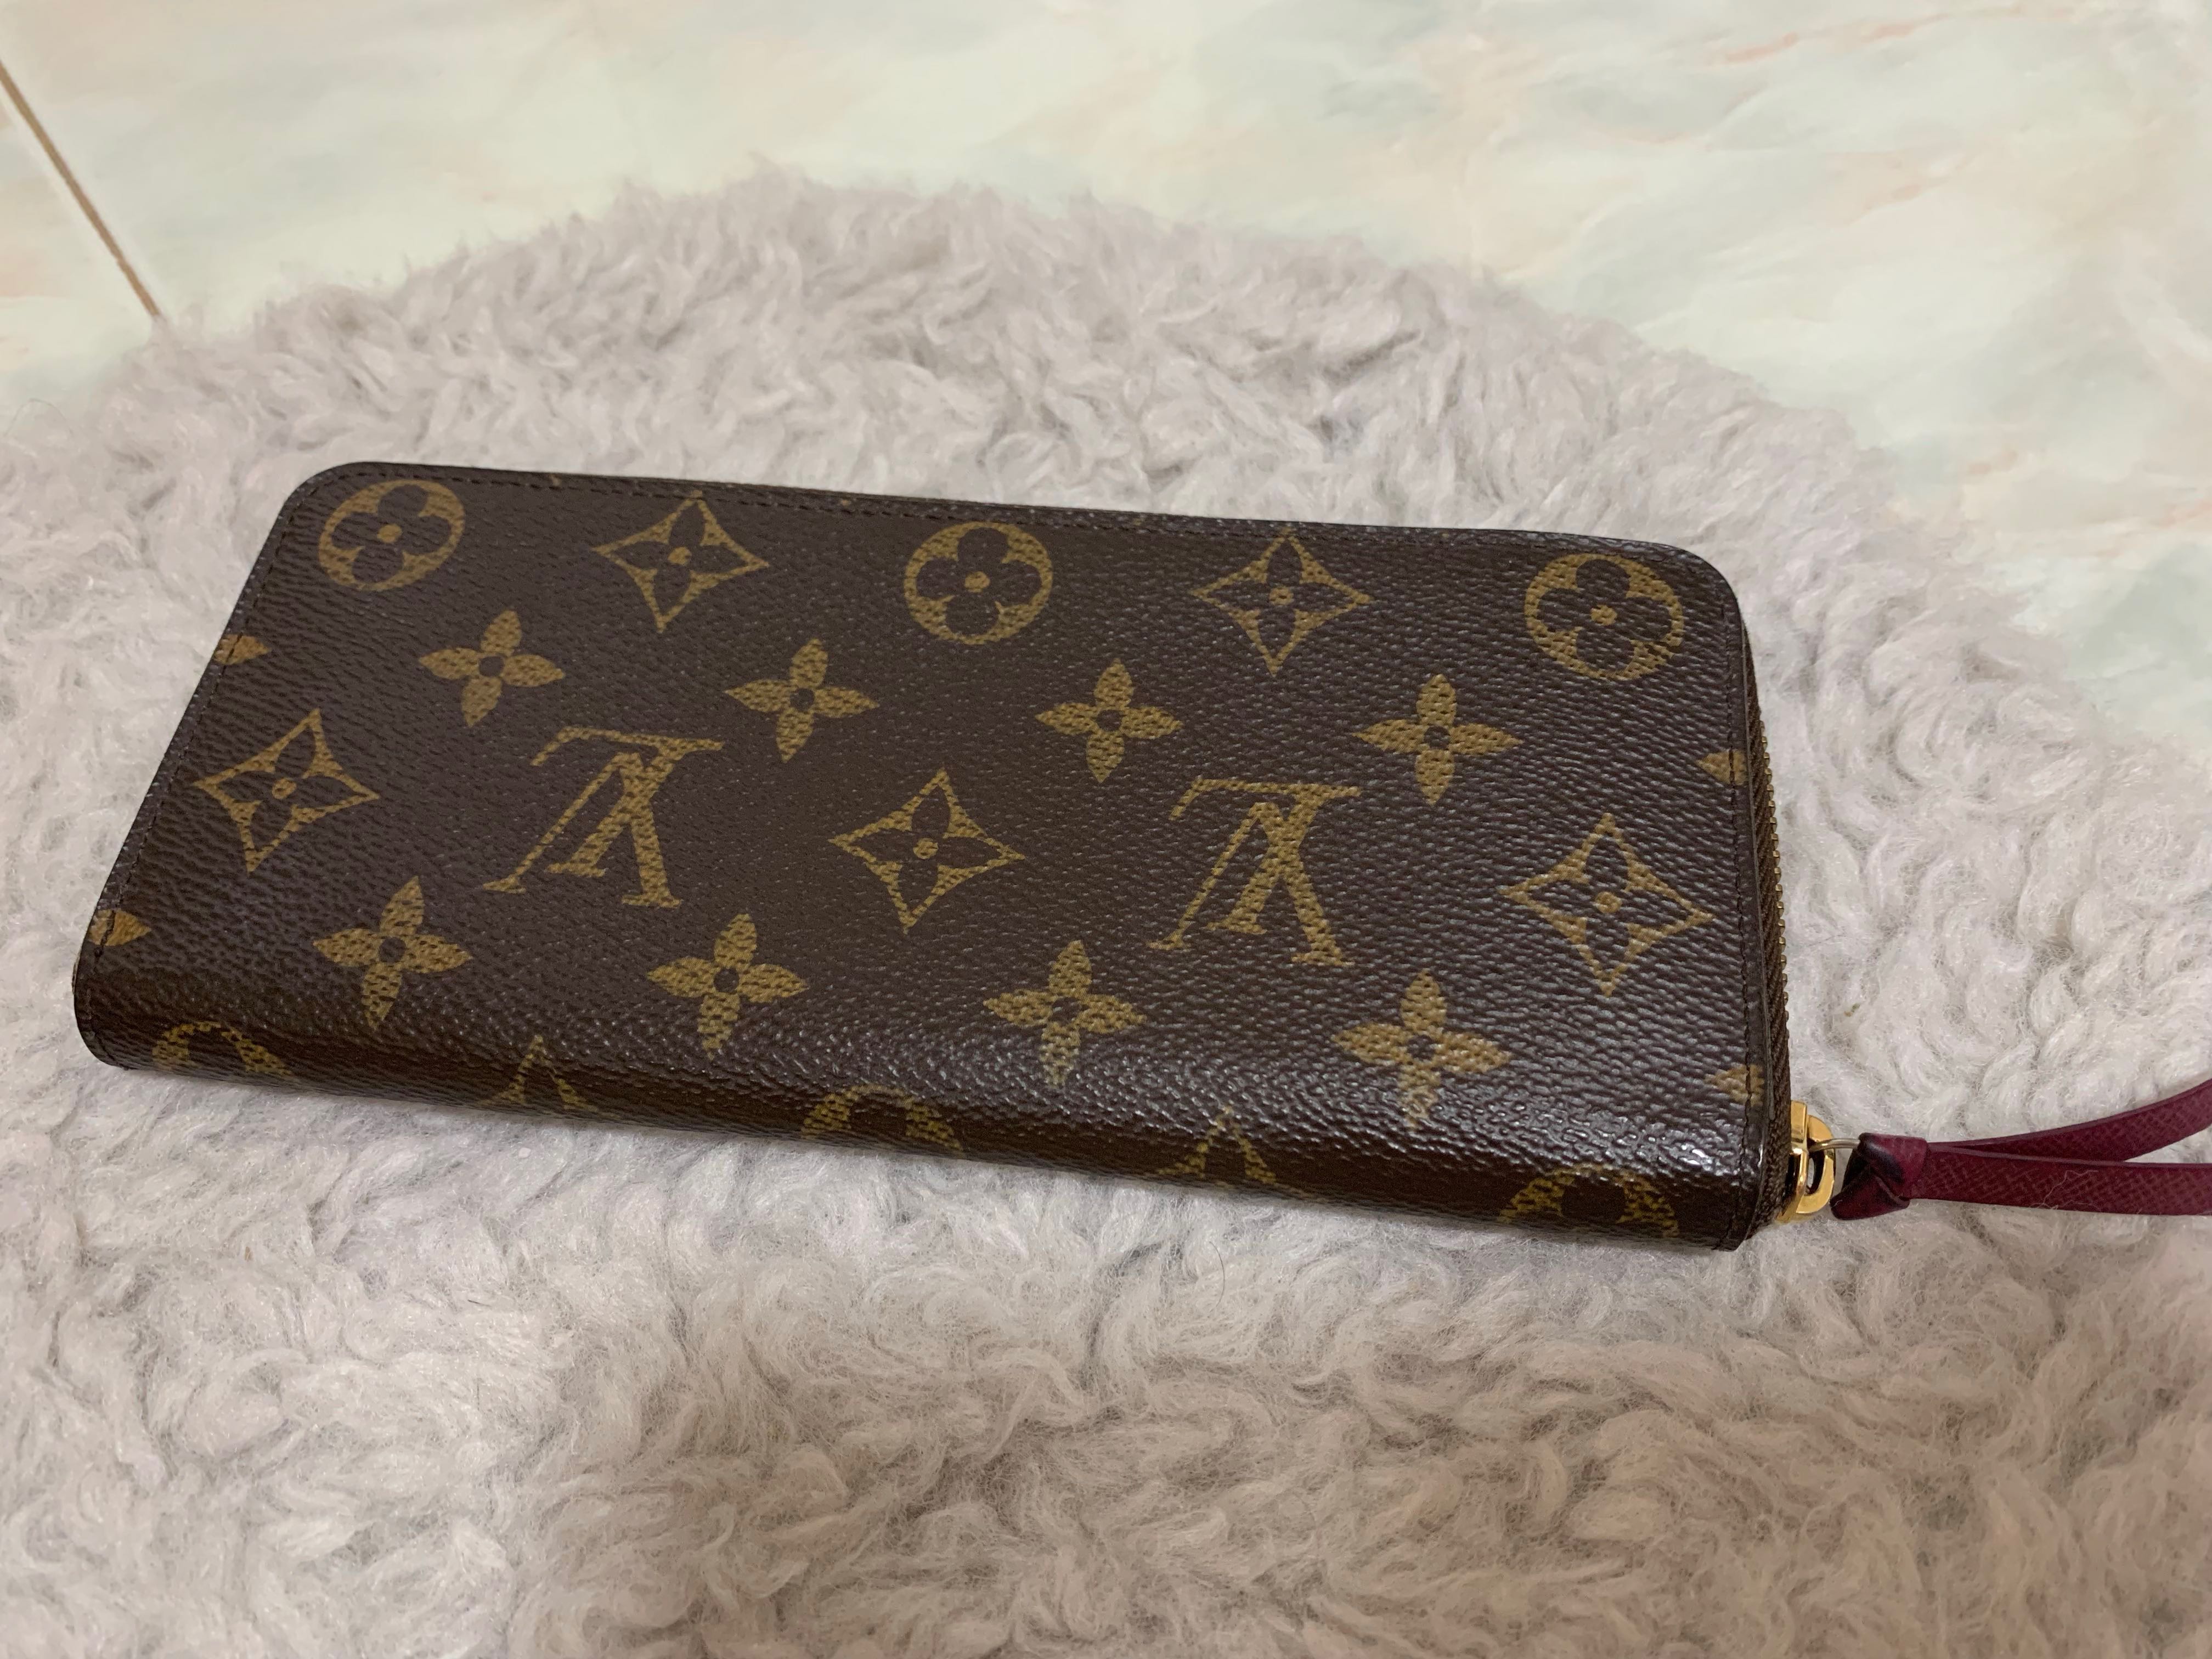 Lv Clemence Wallet Review